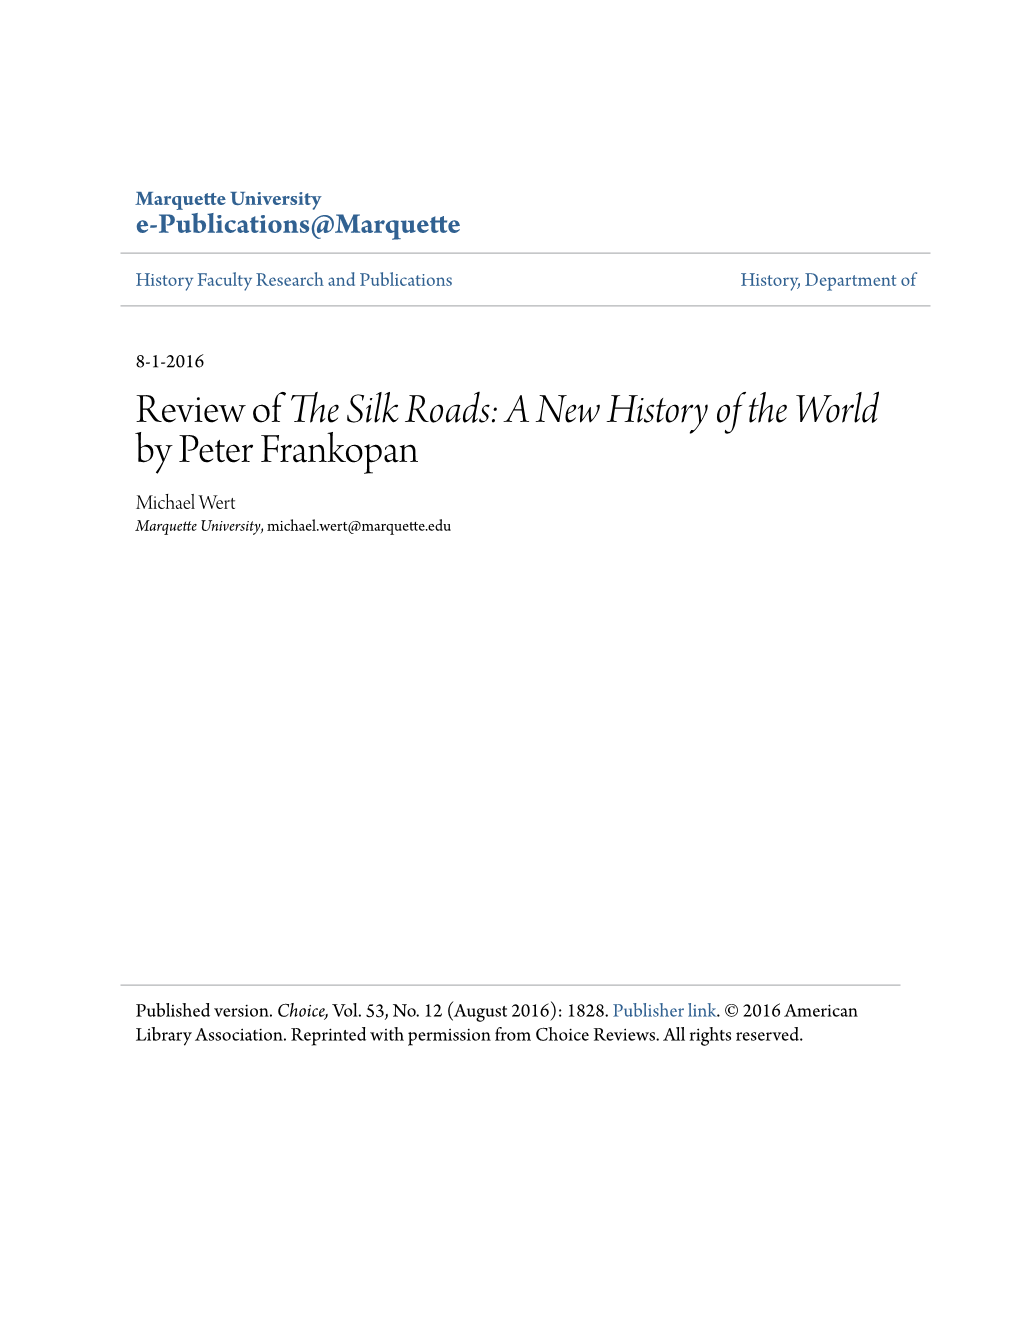 Review of the Silk Roads: a New History of the World by Peter Frankopan Michael Wert Marquette University, Michael.Wert@Marquette.Edu